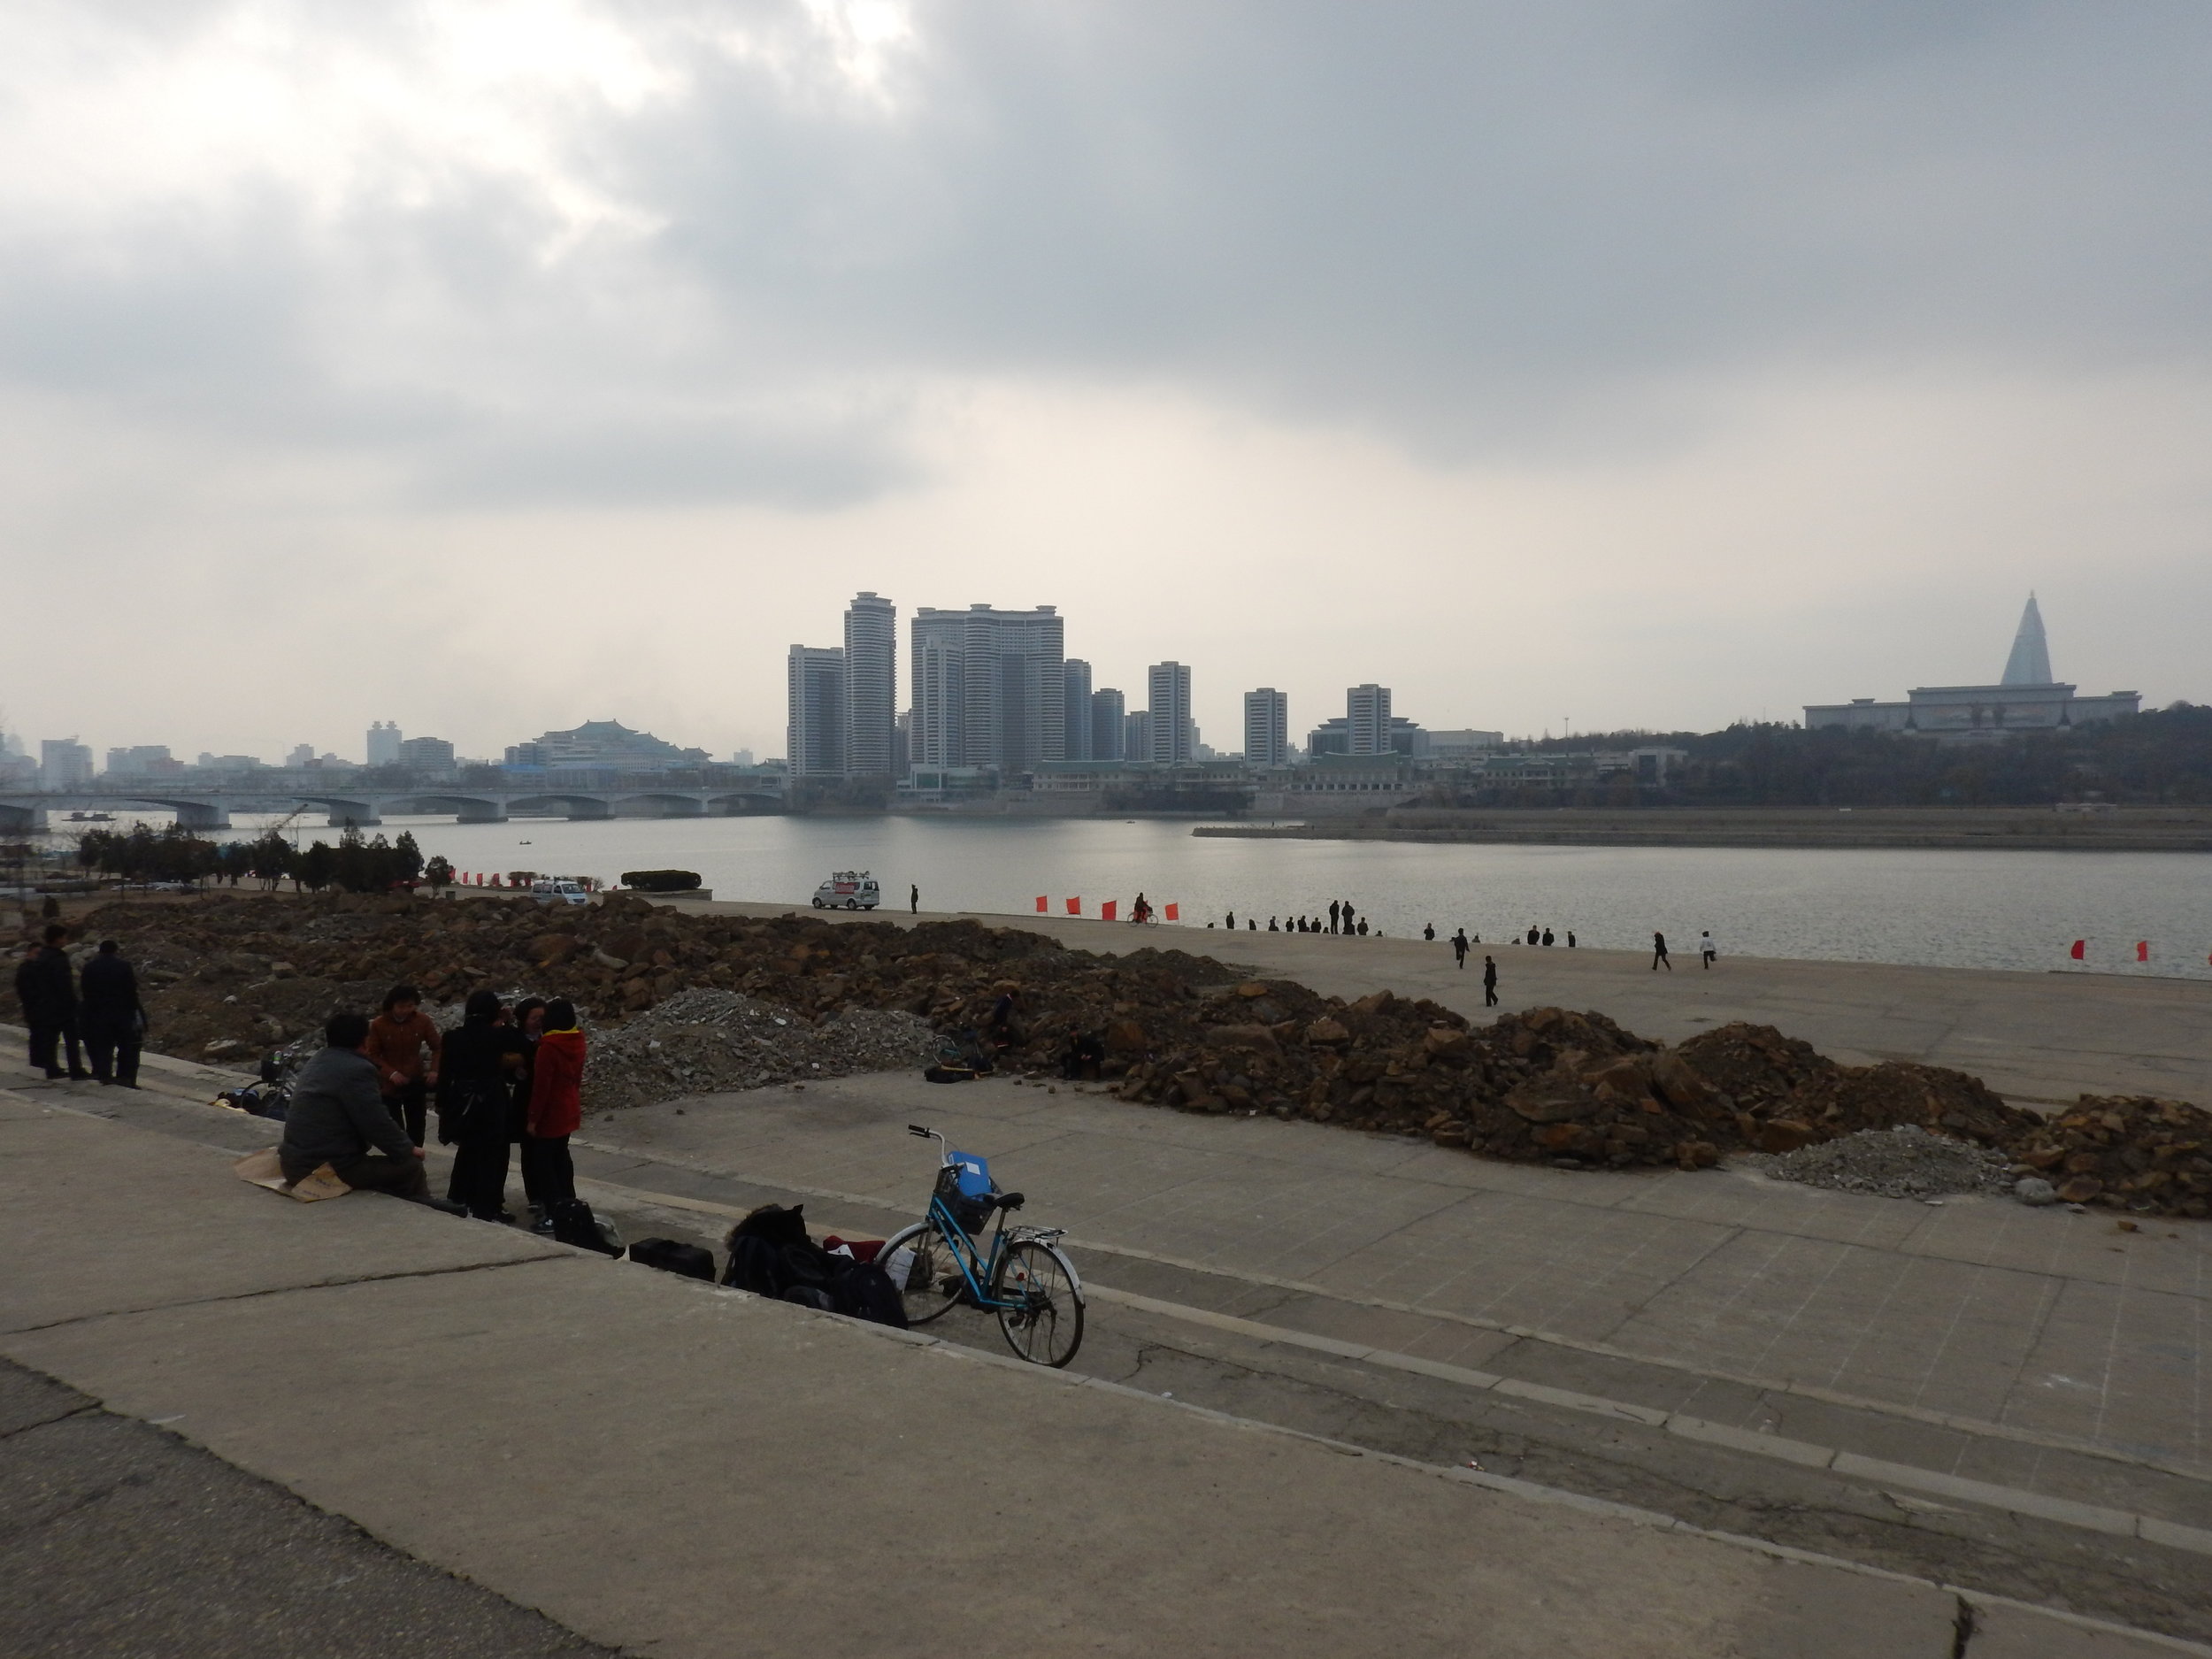  A view of the Taedong River as seen from the eastern bank, which was undergoing renovation in March 2016. This picture is actually illegal, as photographing construction sites is prohibited by North Korean law. (Photo by Ethan Jakob Craft.) 